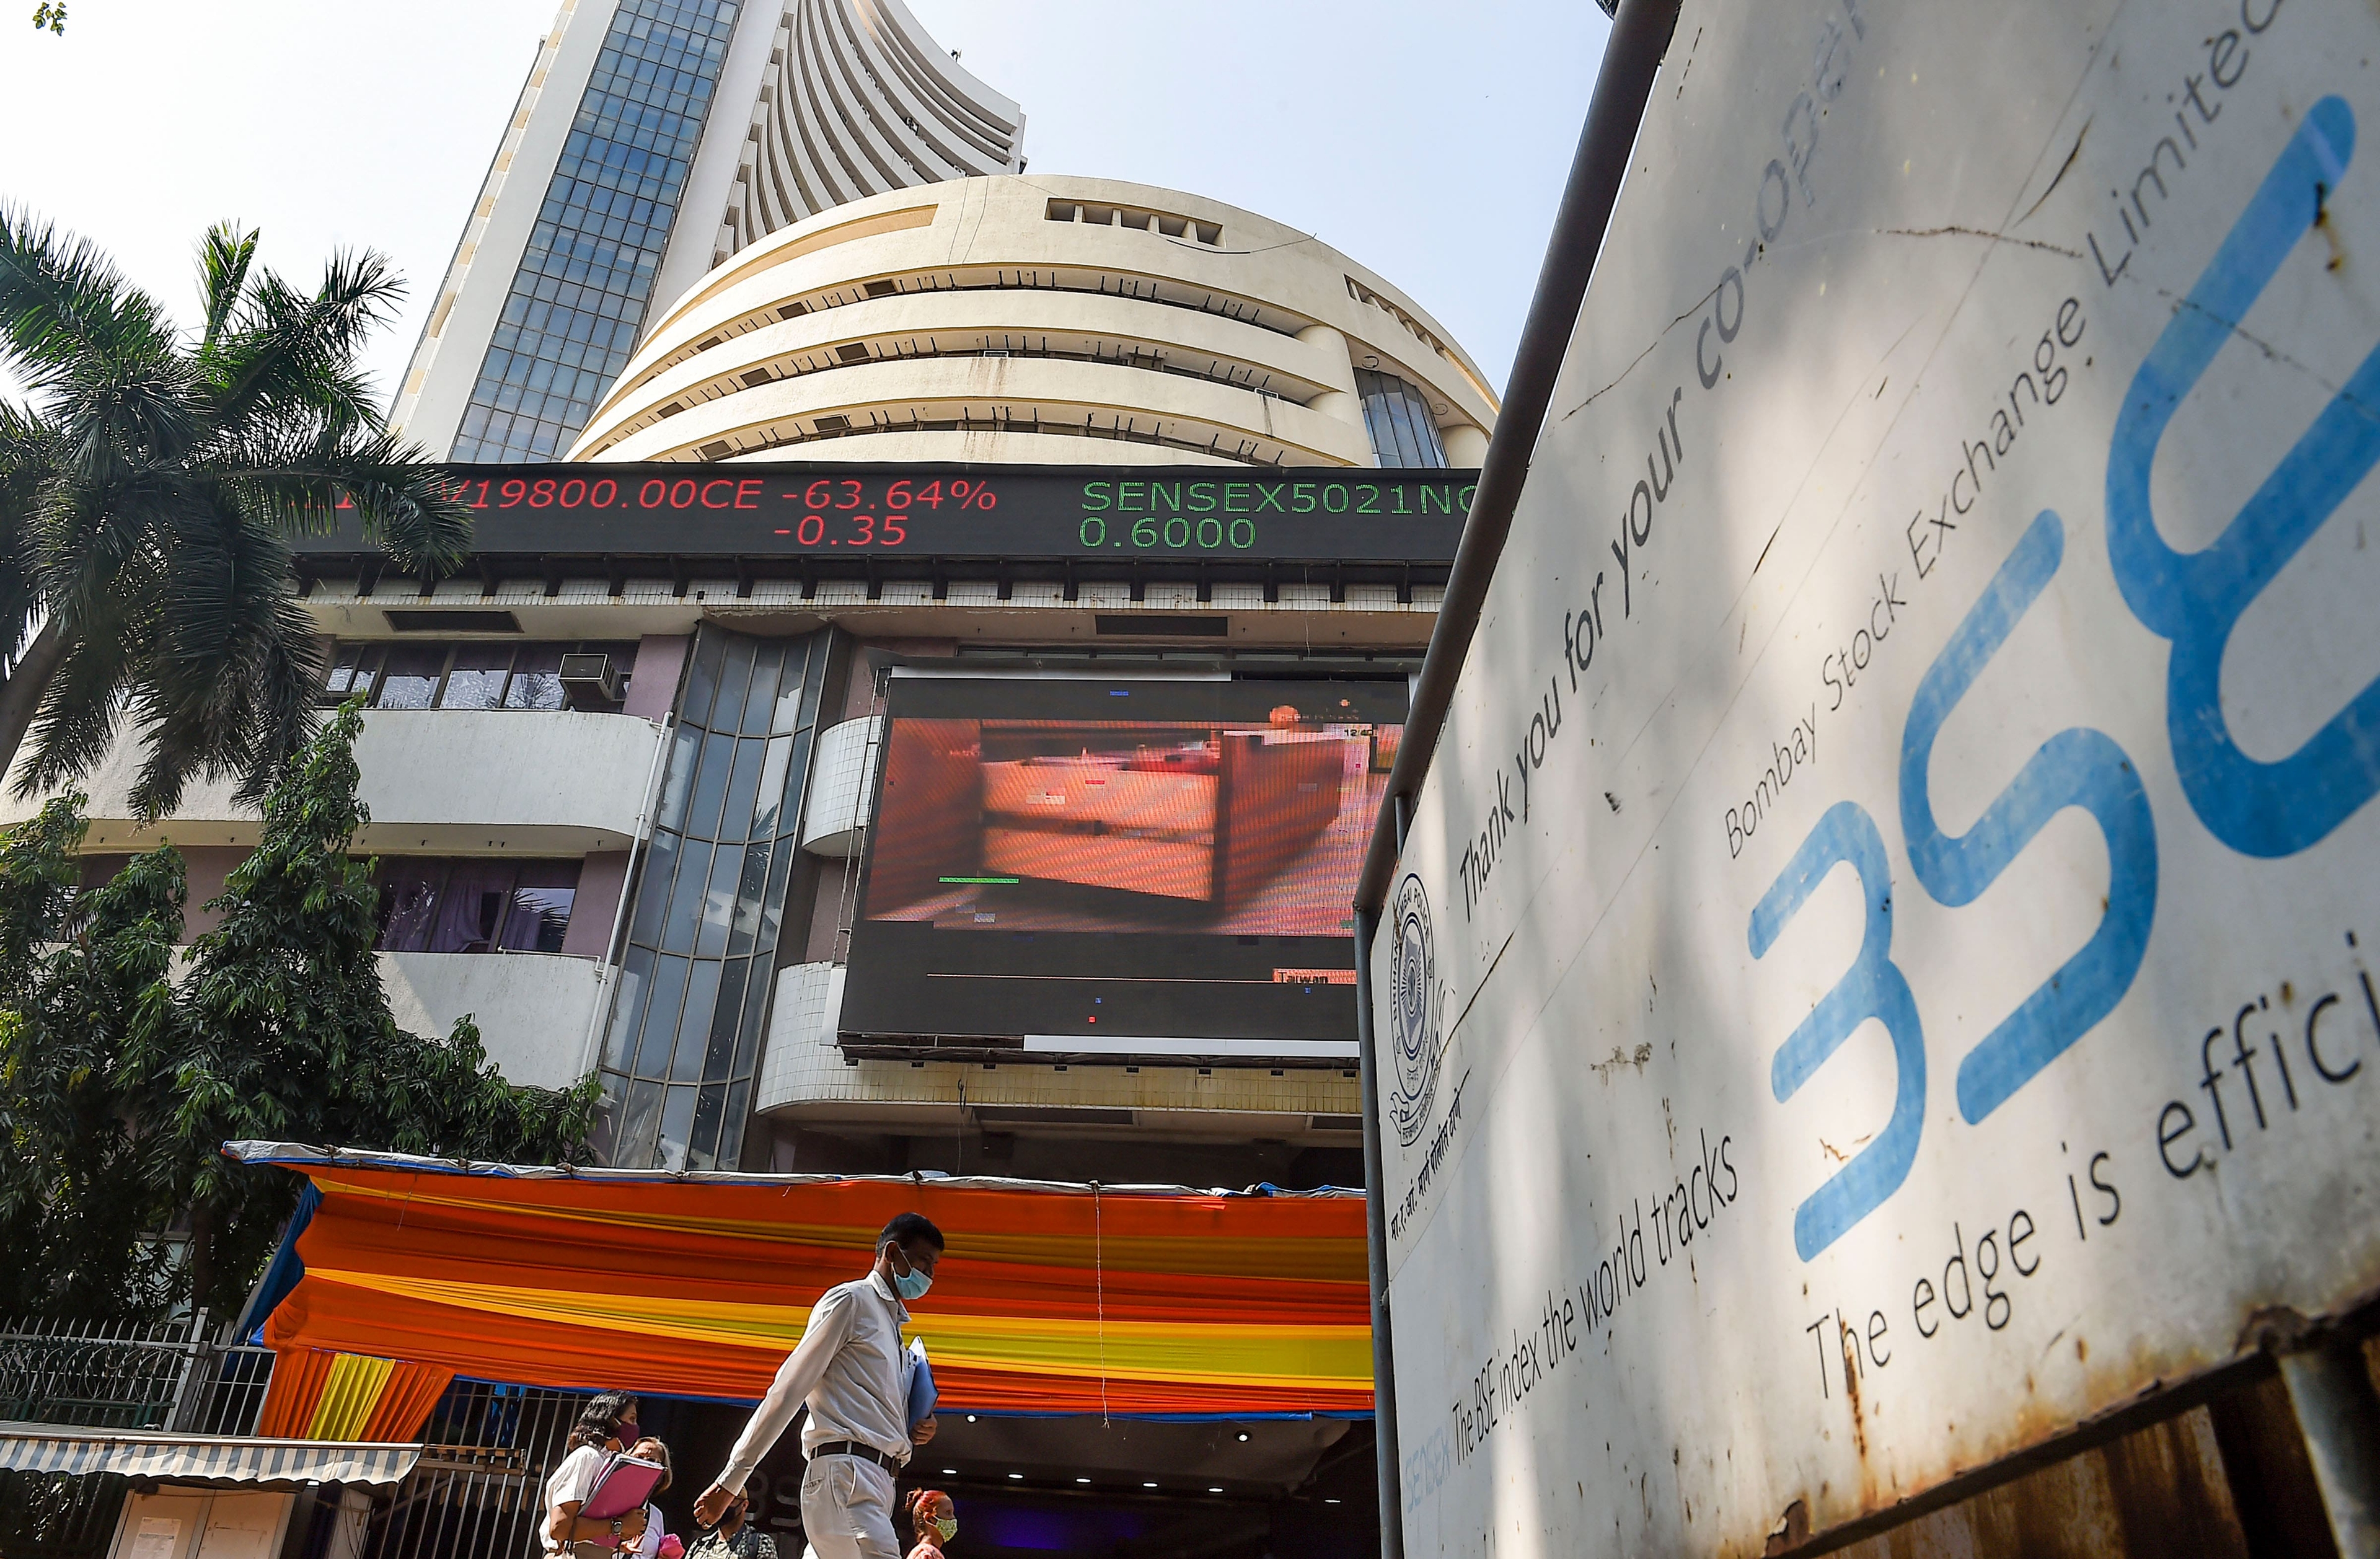 Indian equity benchmarks extended gains to the third day in a row on Thursday, helped by financial, consumer and auto shares, as planned talks between Ukraine and Russia buoyed global risk-on sentiment. The Sensex ended 817 points higher at 55,464.4 and the Nifty50 settled at 16,594.9, up 249.6 points from its previous close.